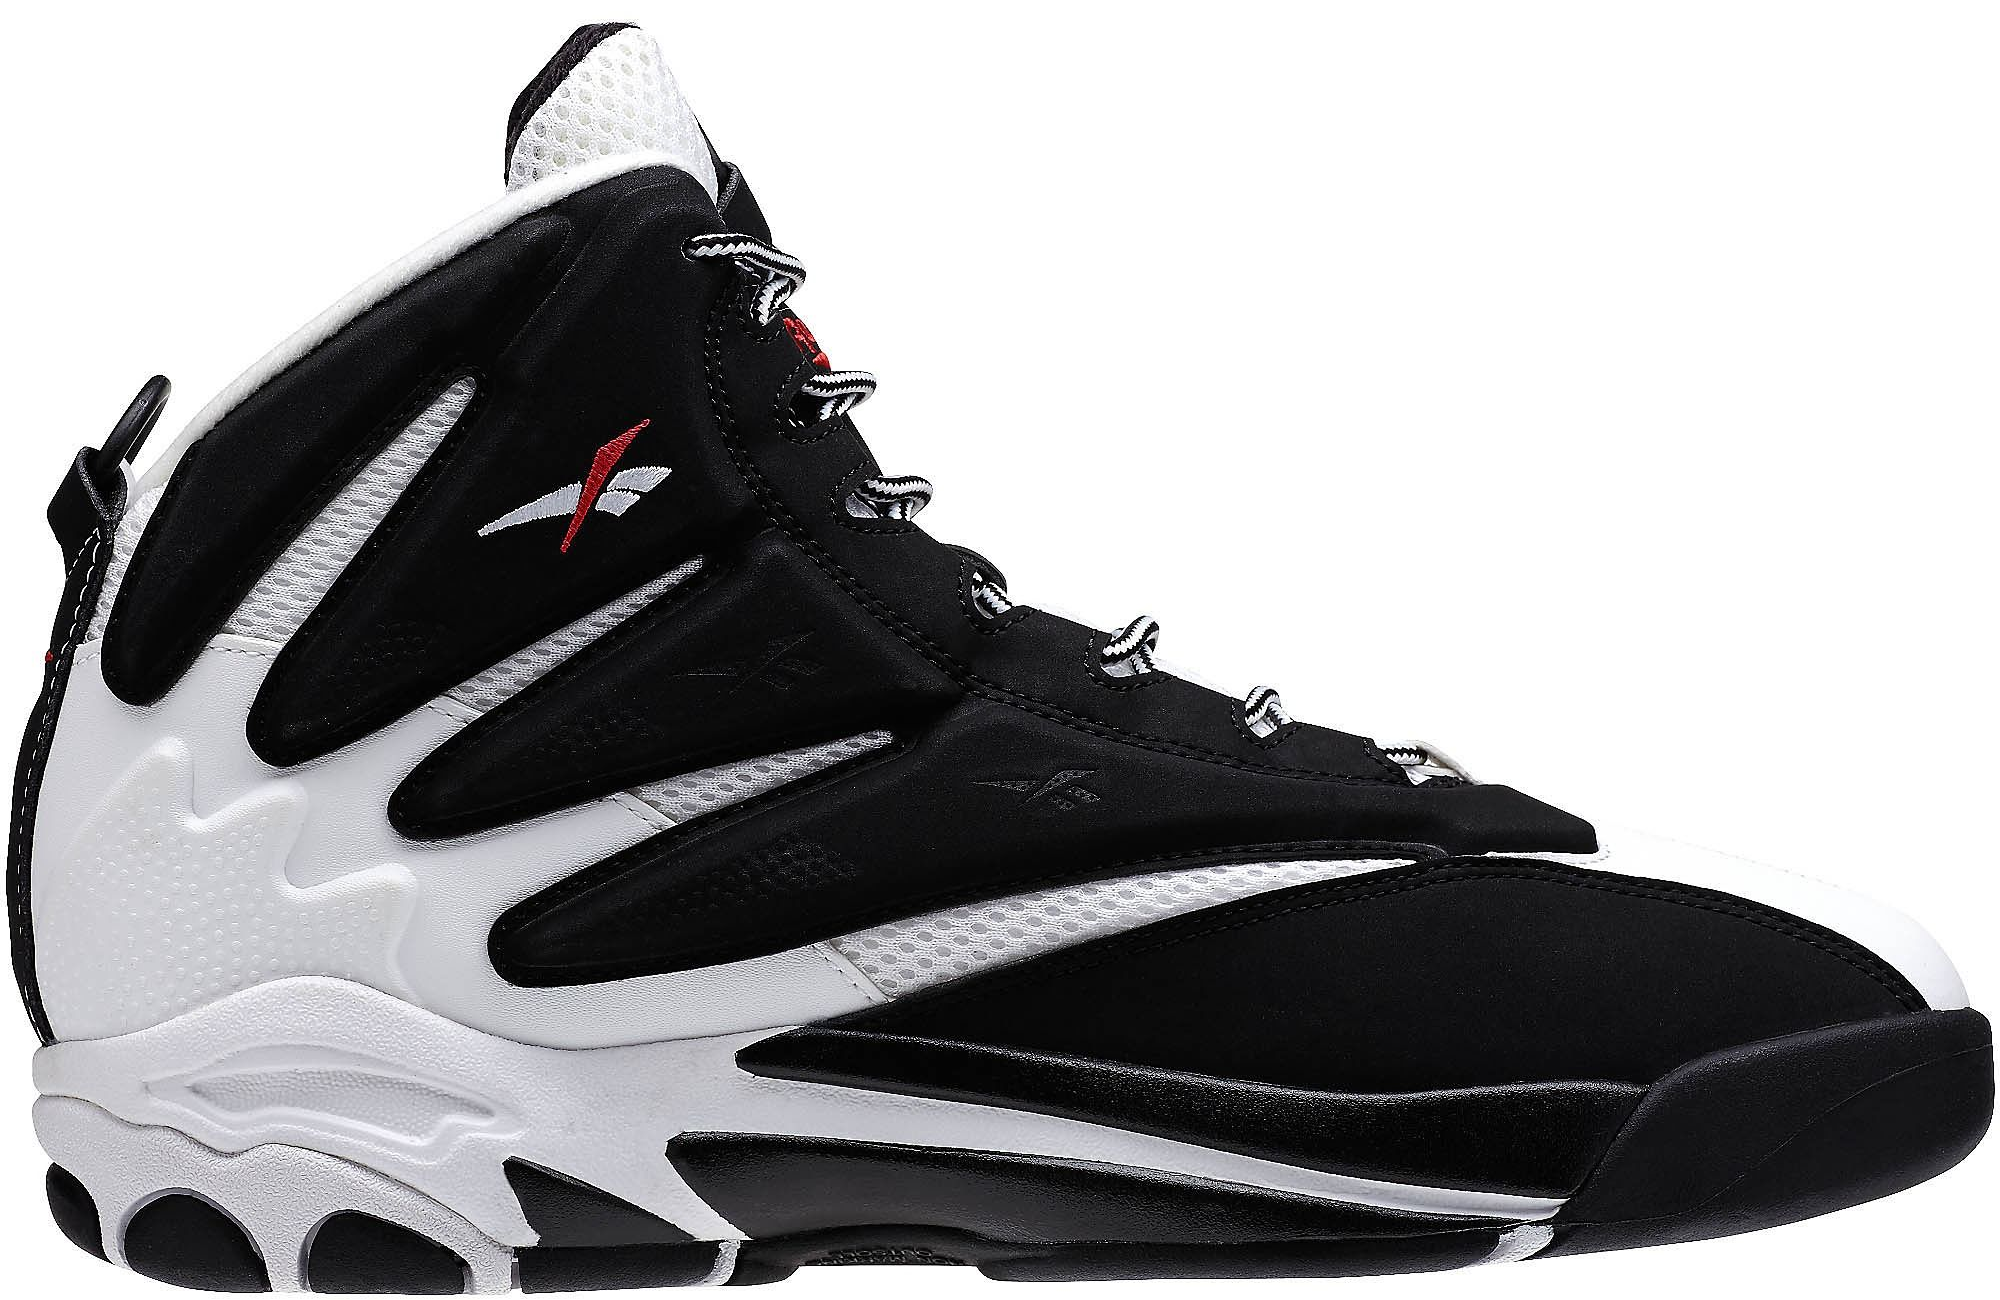 black red and white reebok